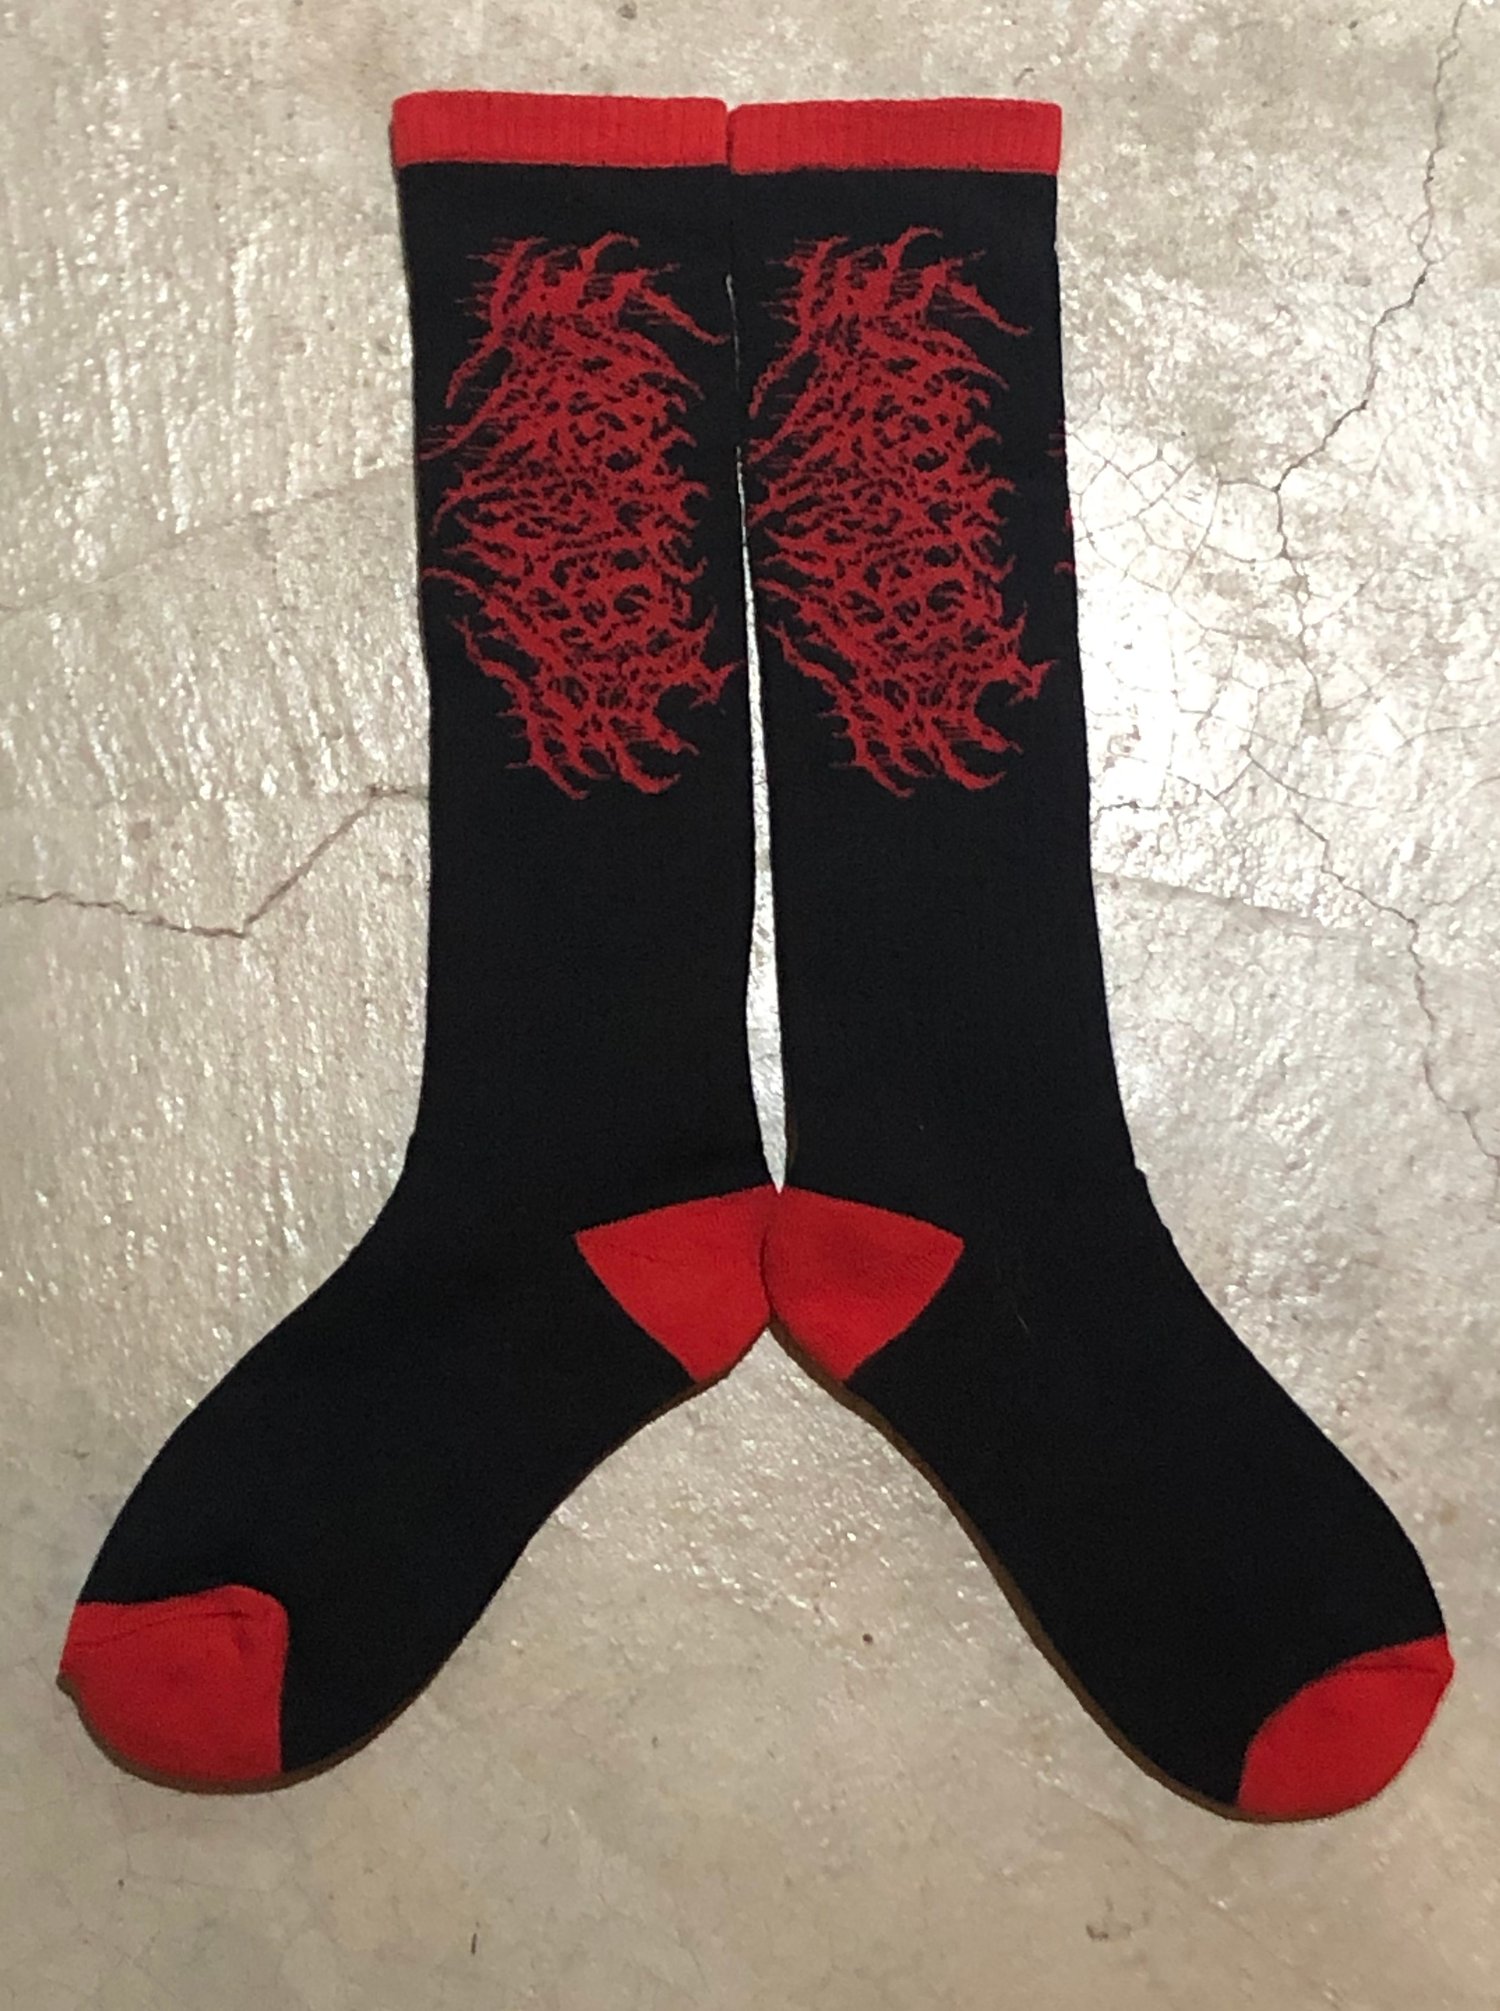 Officially Licensed Disavowed Fatuous Rump and Umbilical Asphyxia socks ...